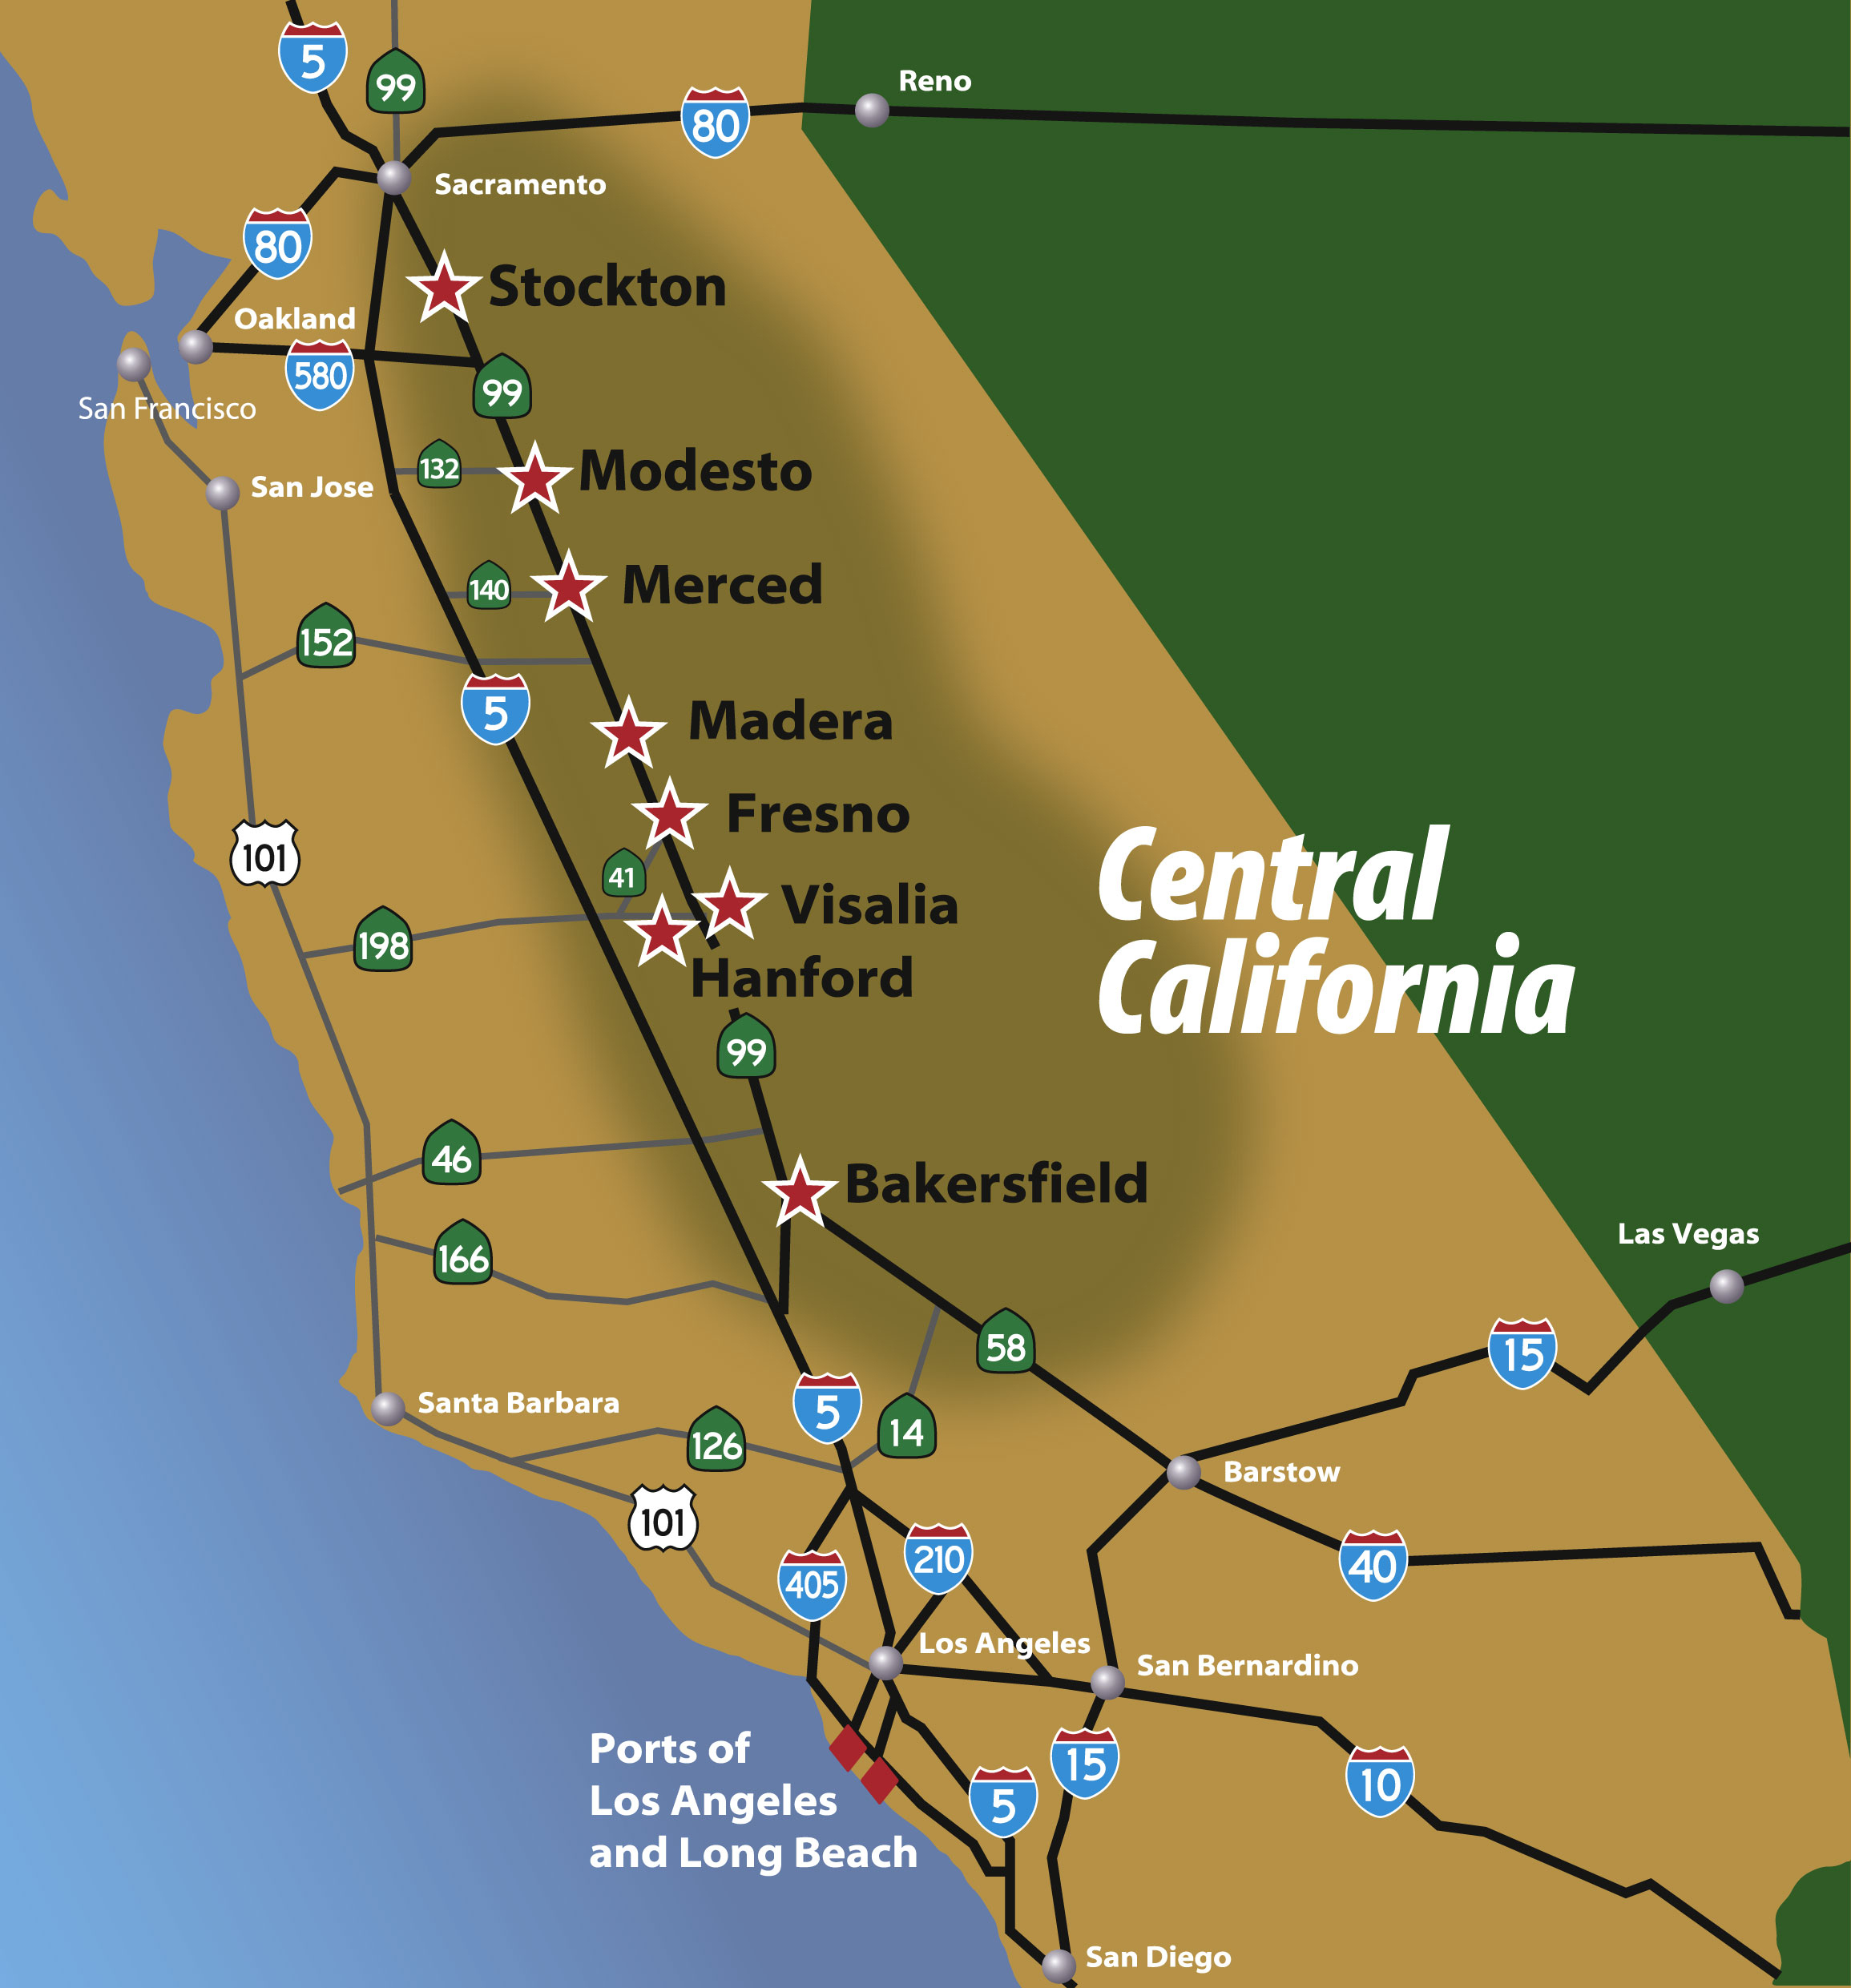 Regional Maps – Central California - Map Of Central California